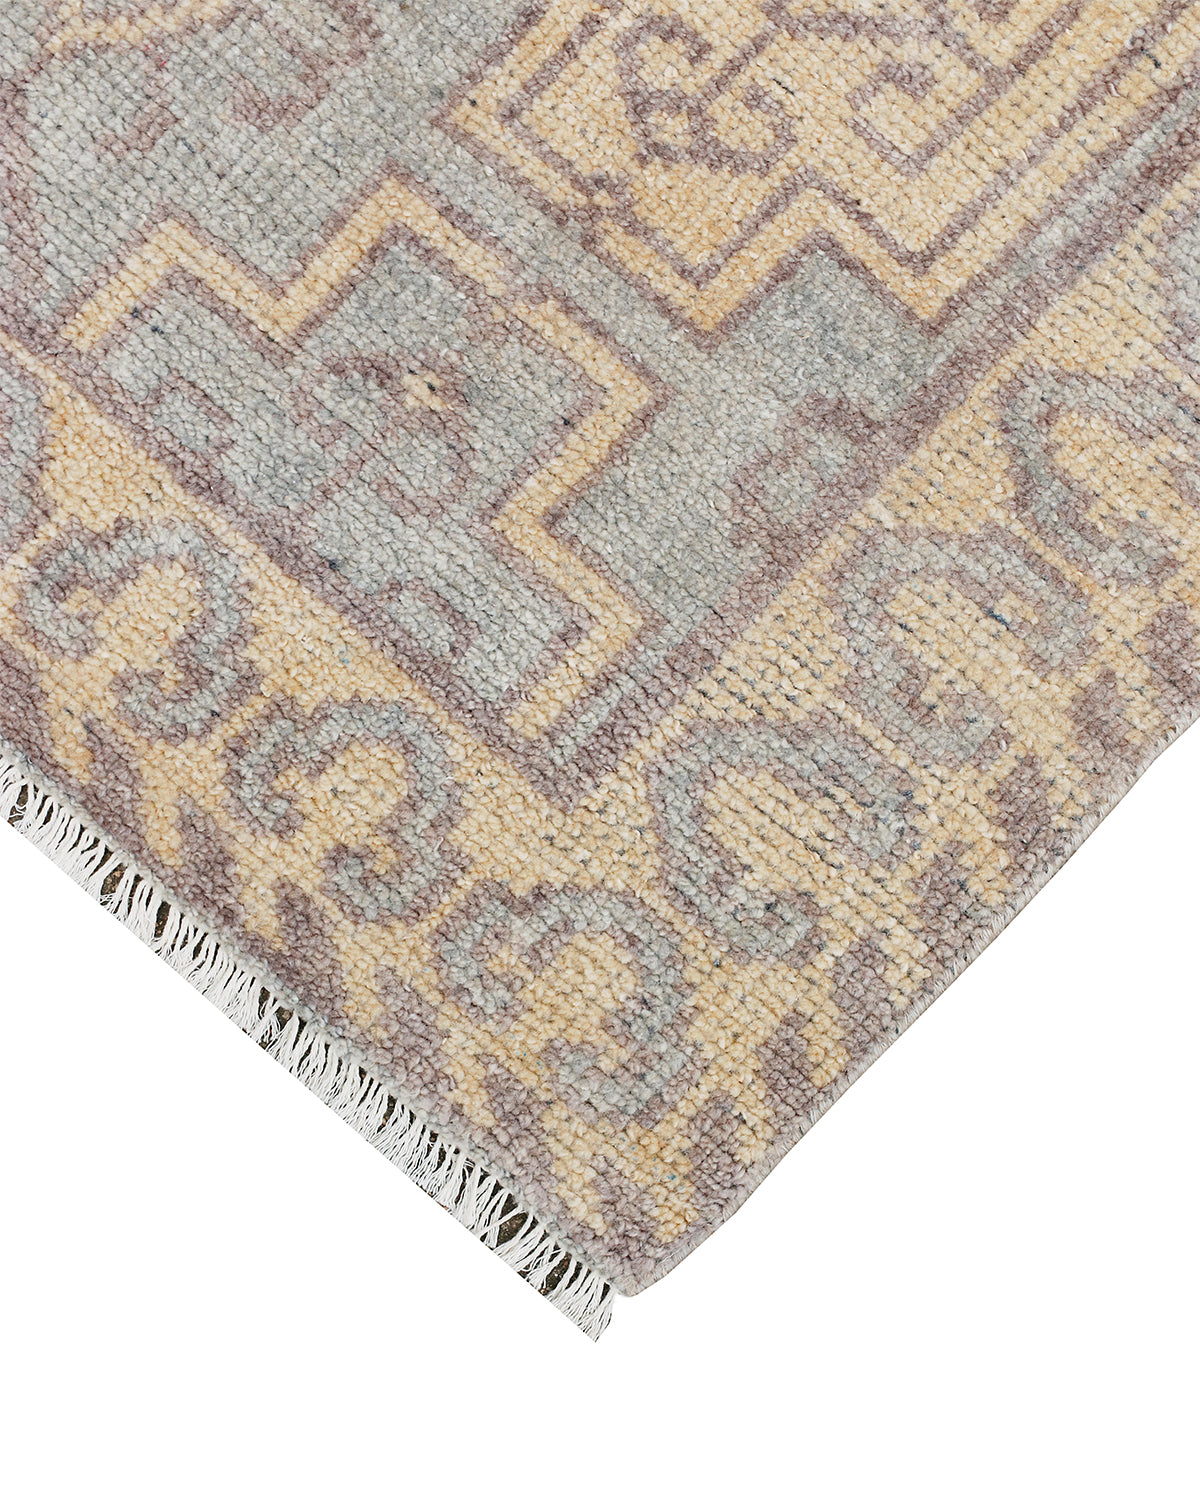 Transitional Hand-knotted Rug (M-23)